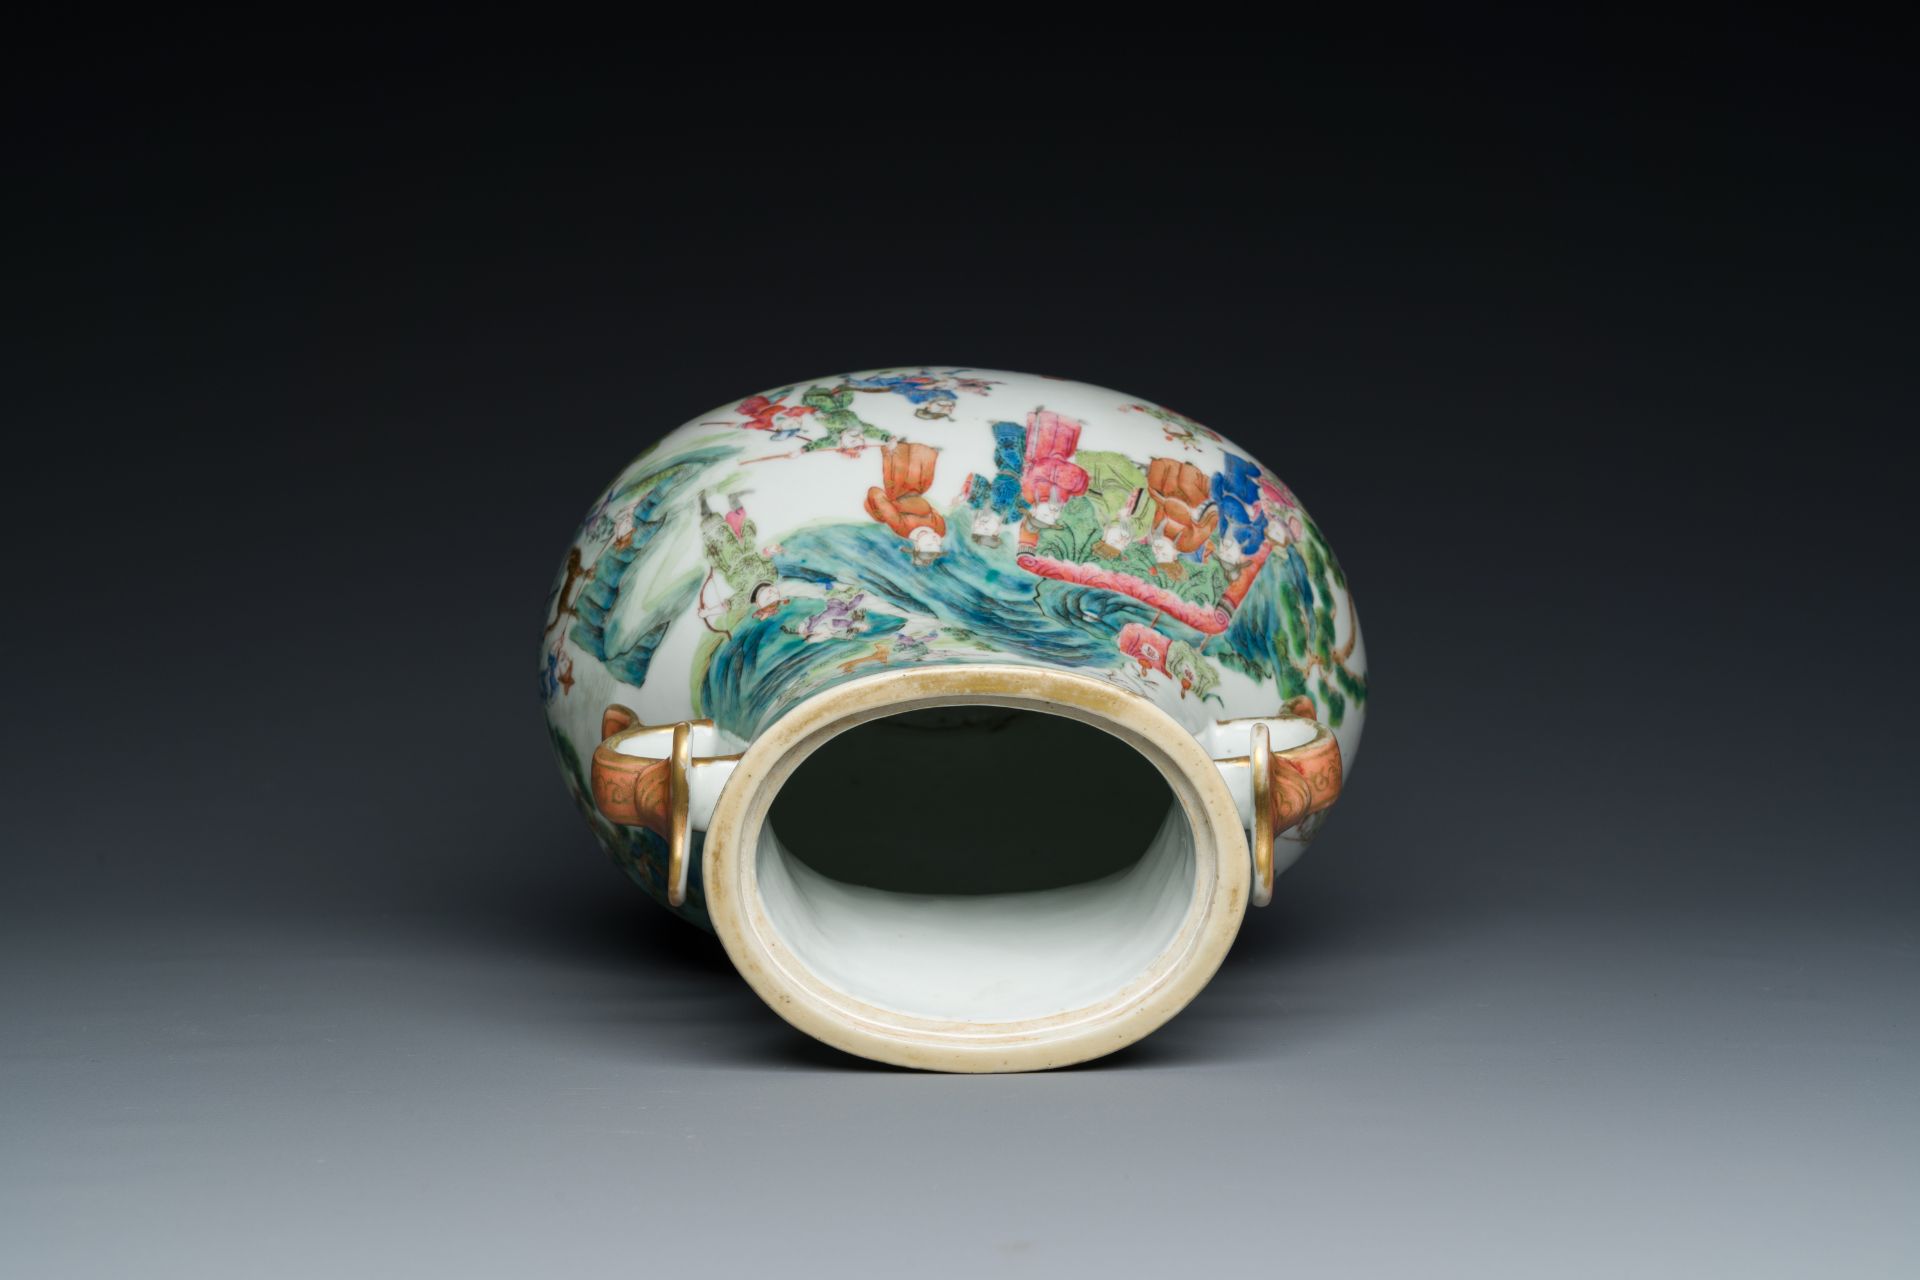 A fine Chinese famille rose 'hu' vase with ruyi handles, 19th C. - Image 5 of 6